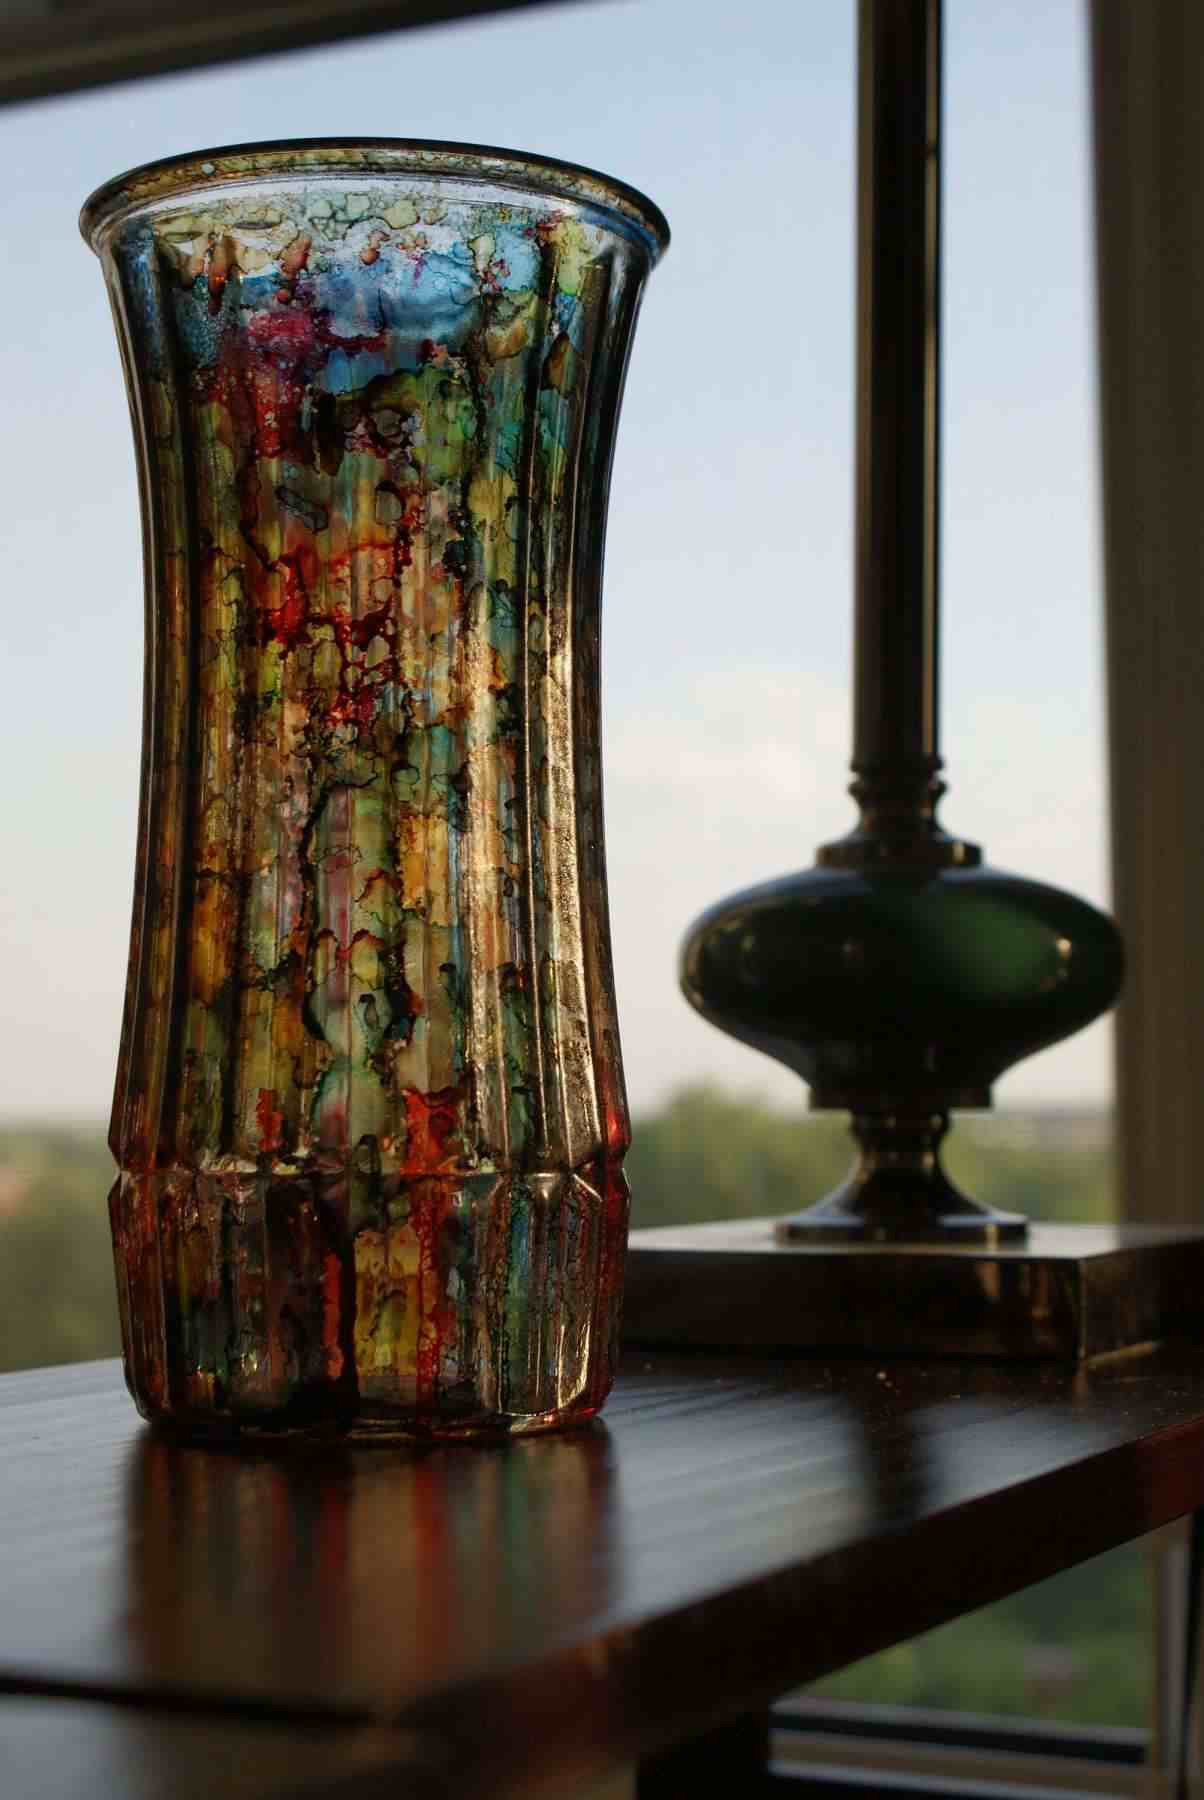 20 Lovable Hobby Lobby Large Glass Vases 2022 free download hobby lobby large glass vases of large hurricane vase luxury for hurricane wall candle sconces inside large hurricane vase inspirational for rustic vase glass rustic flower vase rustic flowe